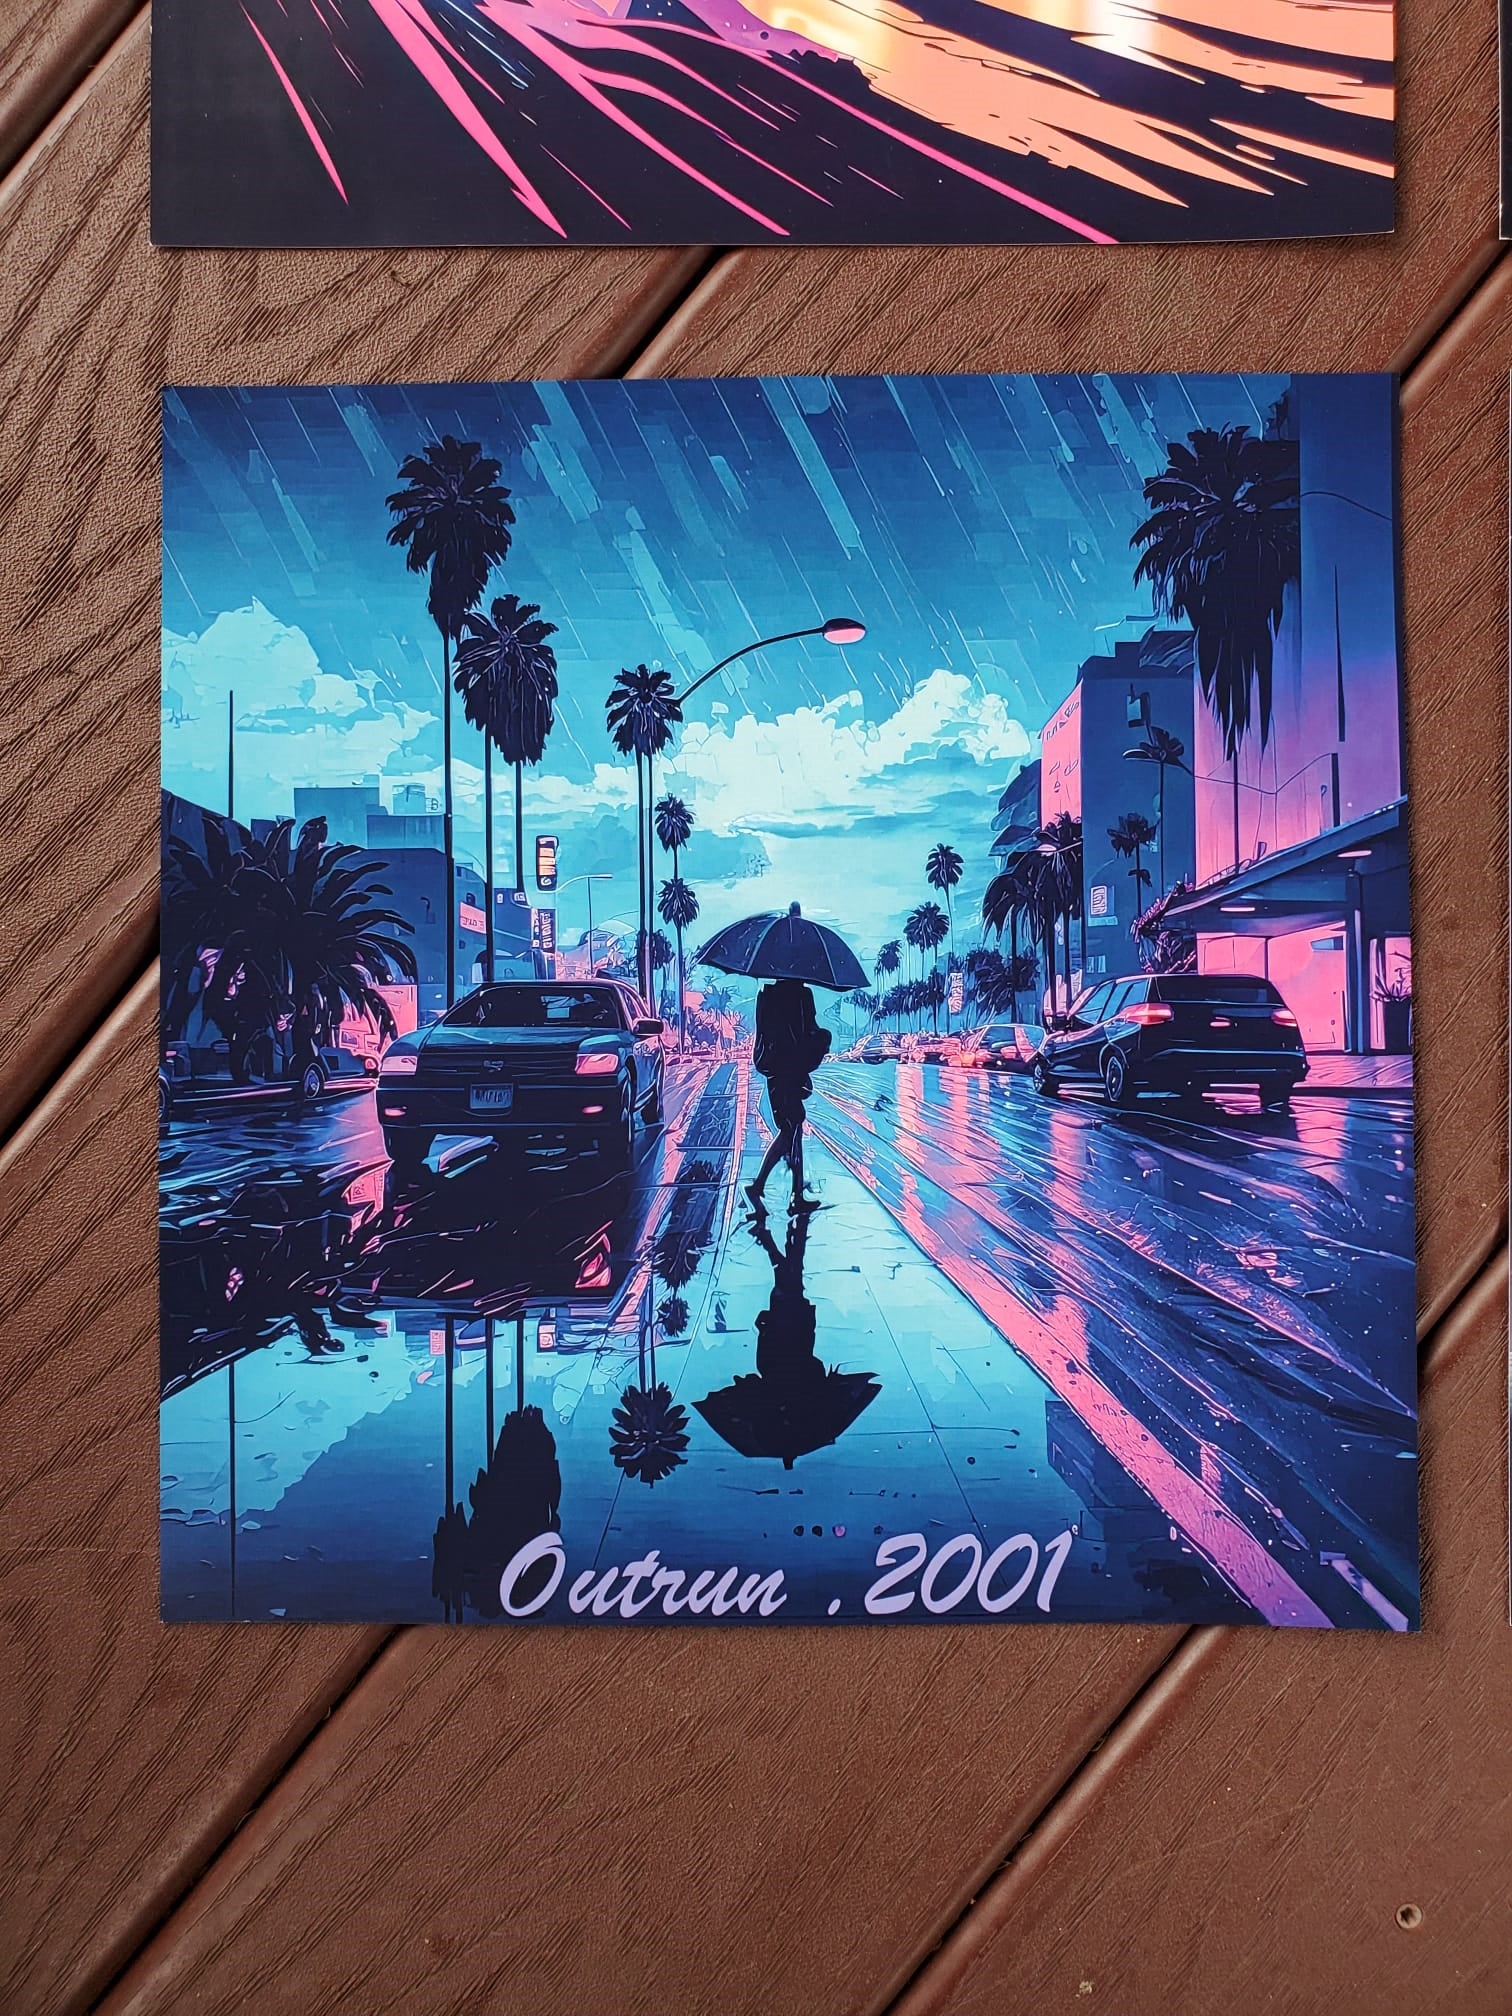 los tokyo - synthwave pastel goth rainy los angeles cityscape (ig@outrun.2001)